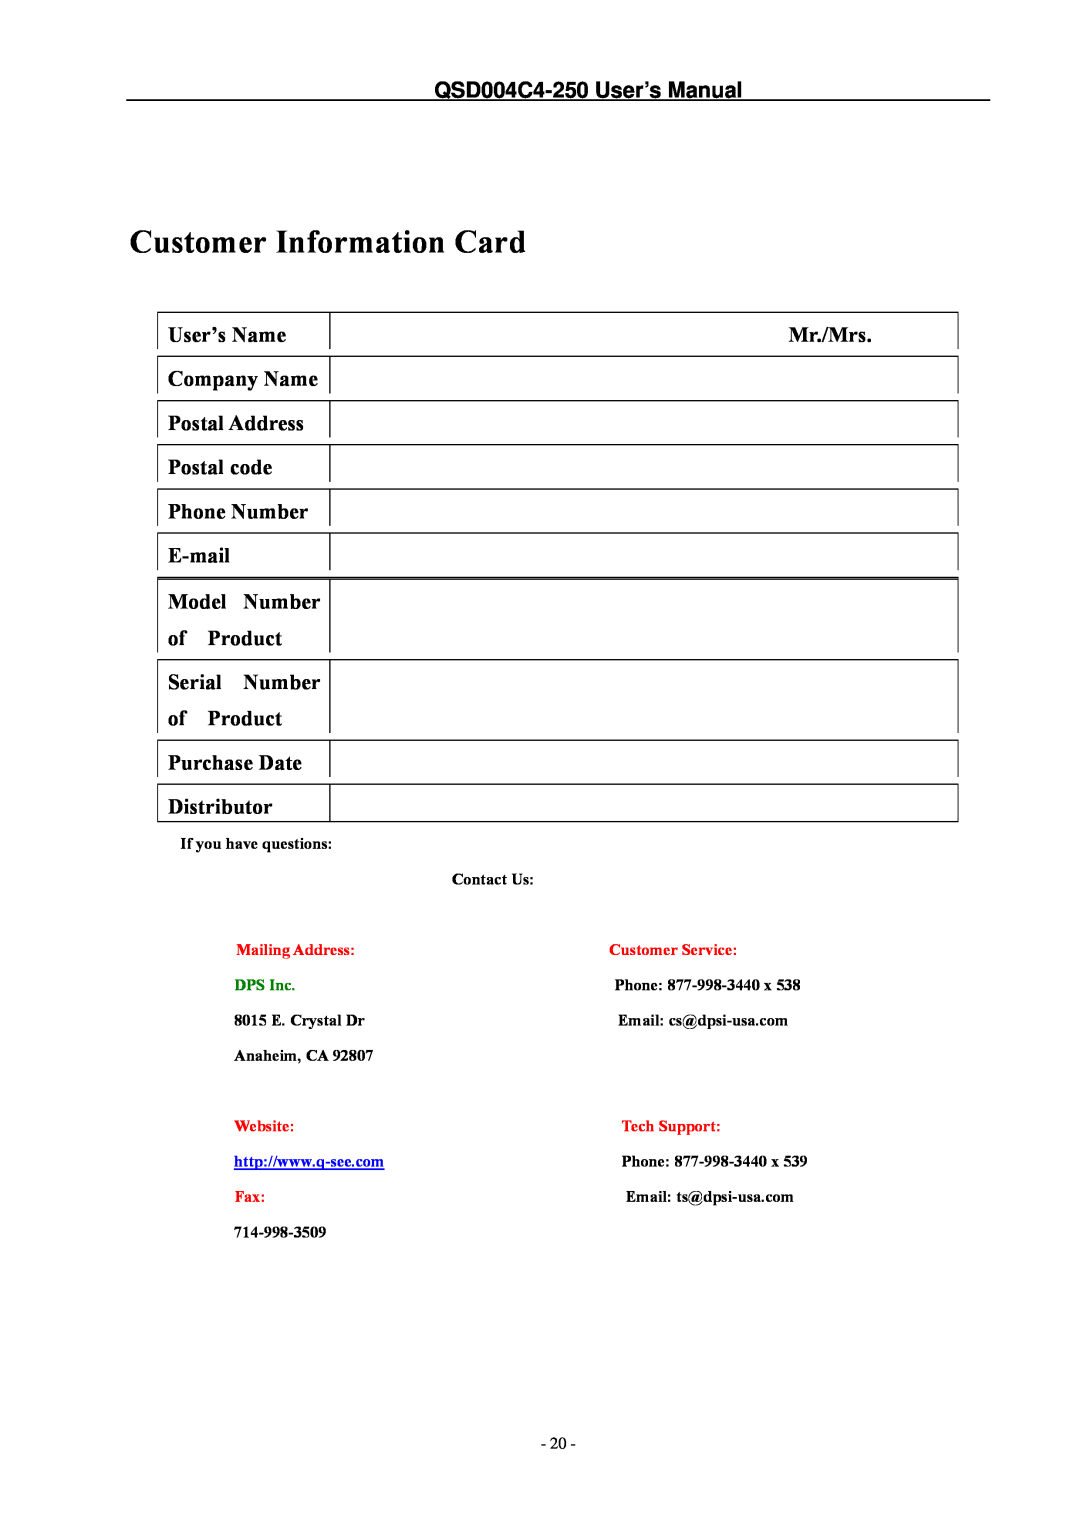 Q-See QSD004C4-250 Customer Information Card, User’s Name Company Name Postal Address, Postal code Phone Number E-mail 